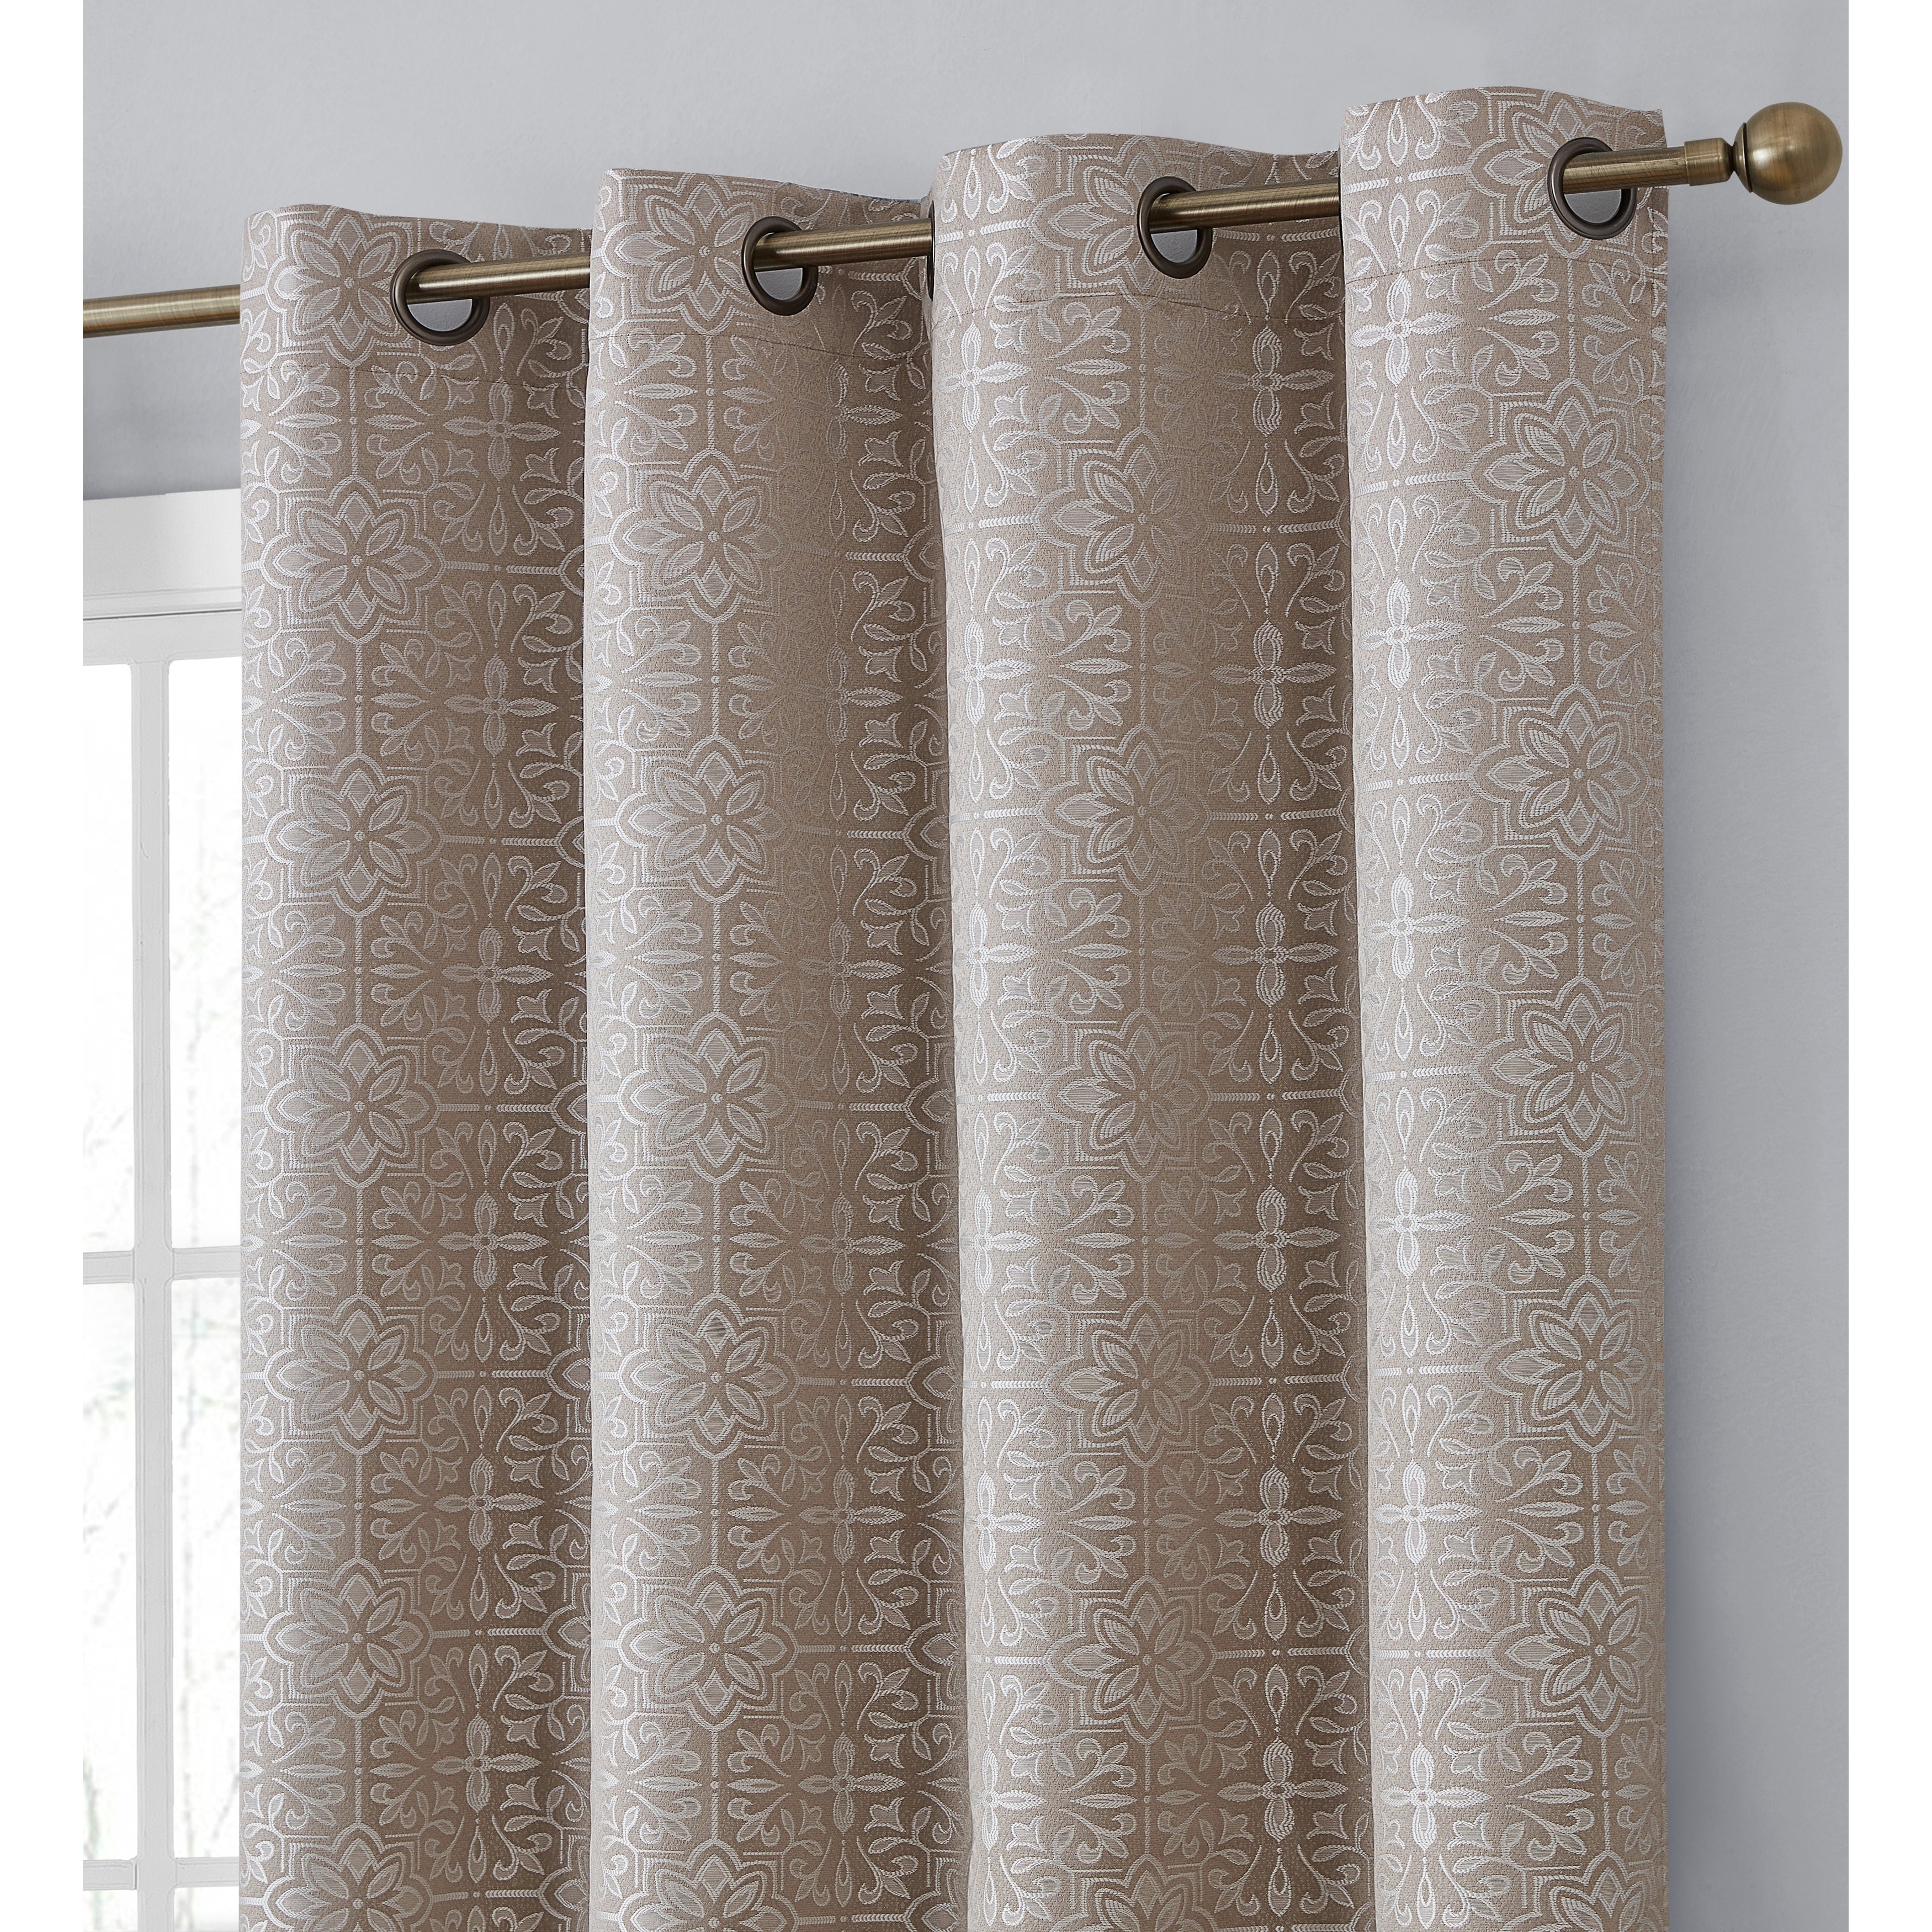 Home & Linens Santiago Tile 100% Complete Blackout Thermal Insulated Heat/Cold/UV Blocking Grommet Curtain Panels - Pair